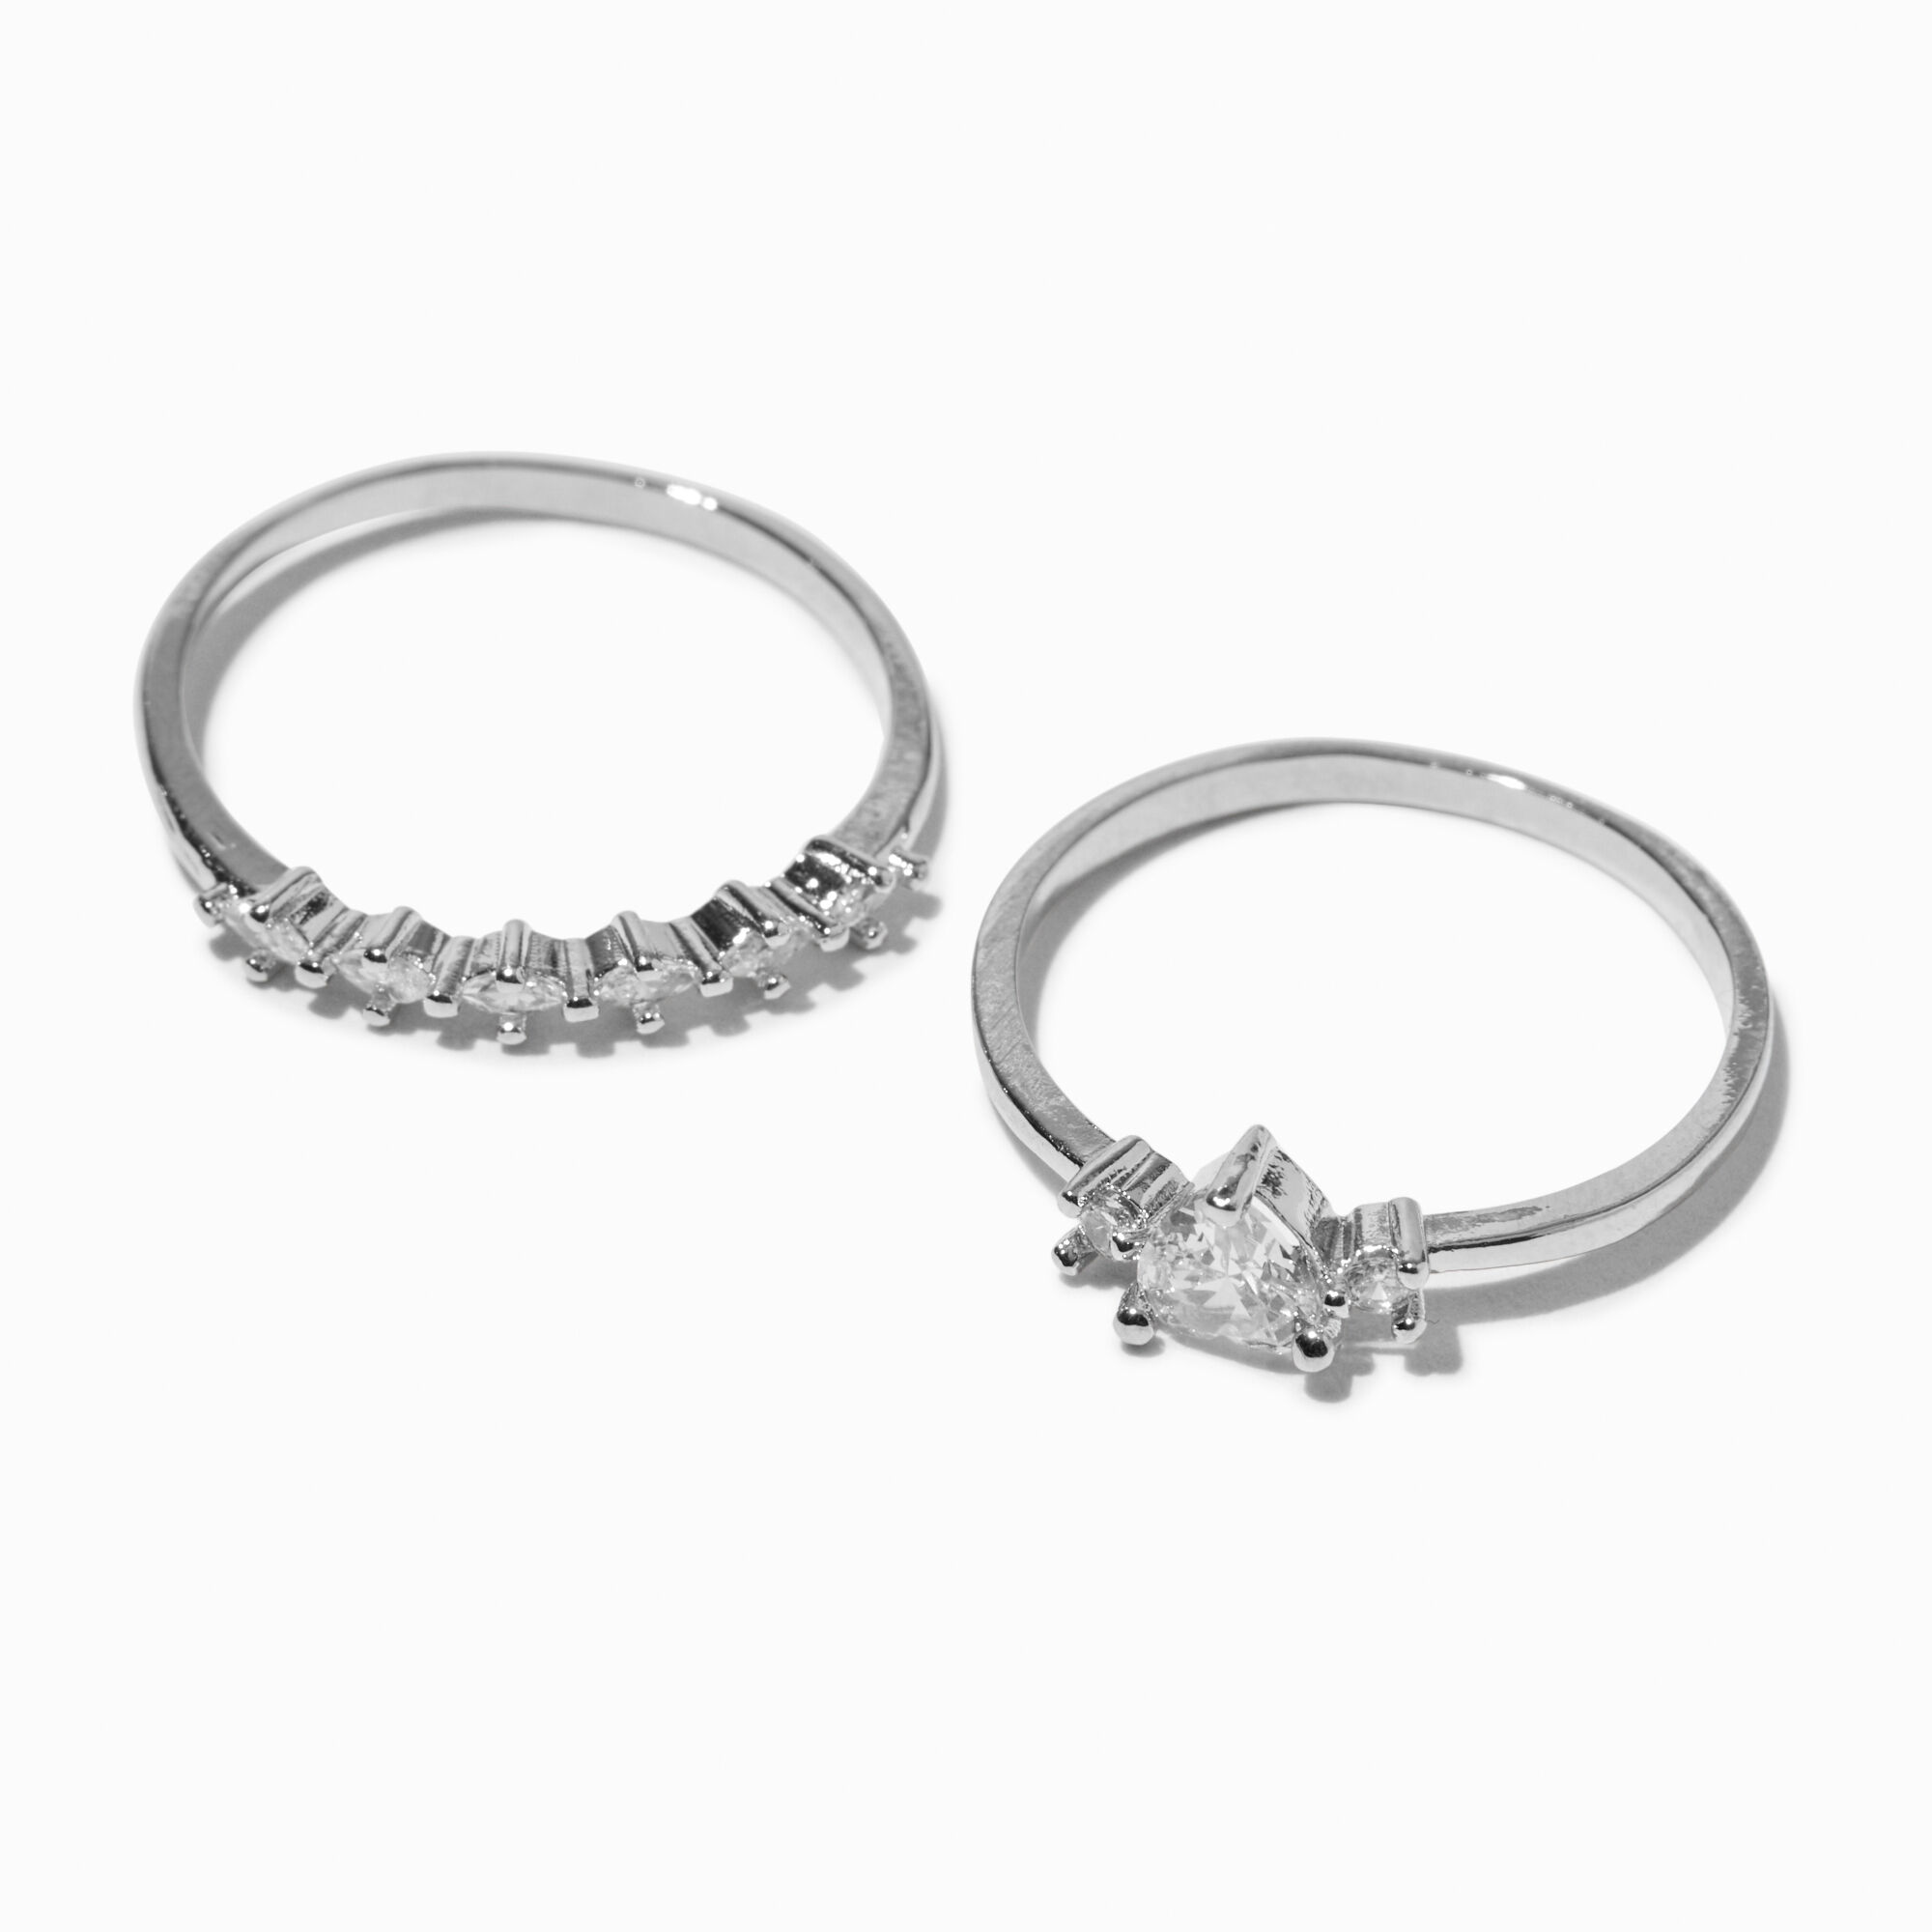 View Claires Tone Cubic Zirconia Heart Rings 2 Pack Silver information